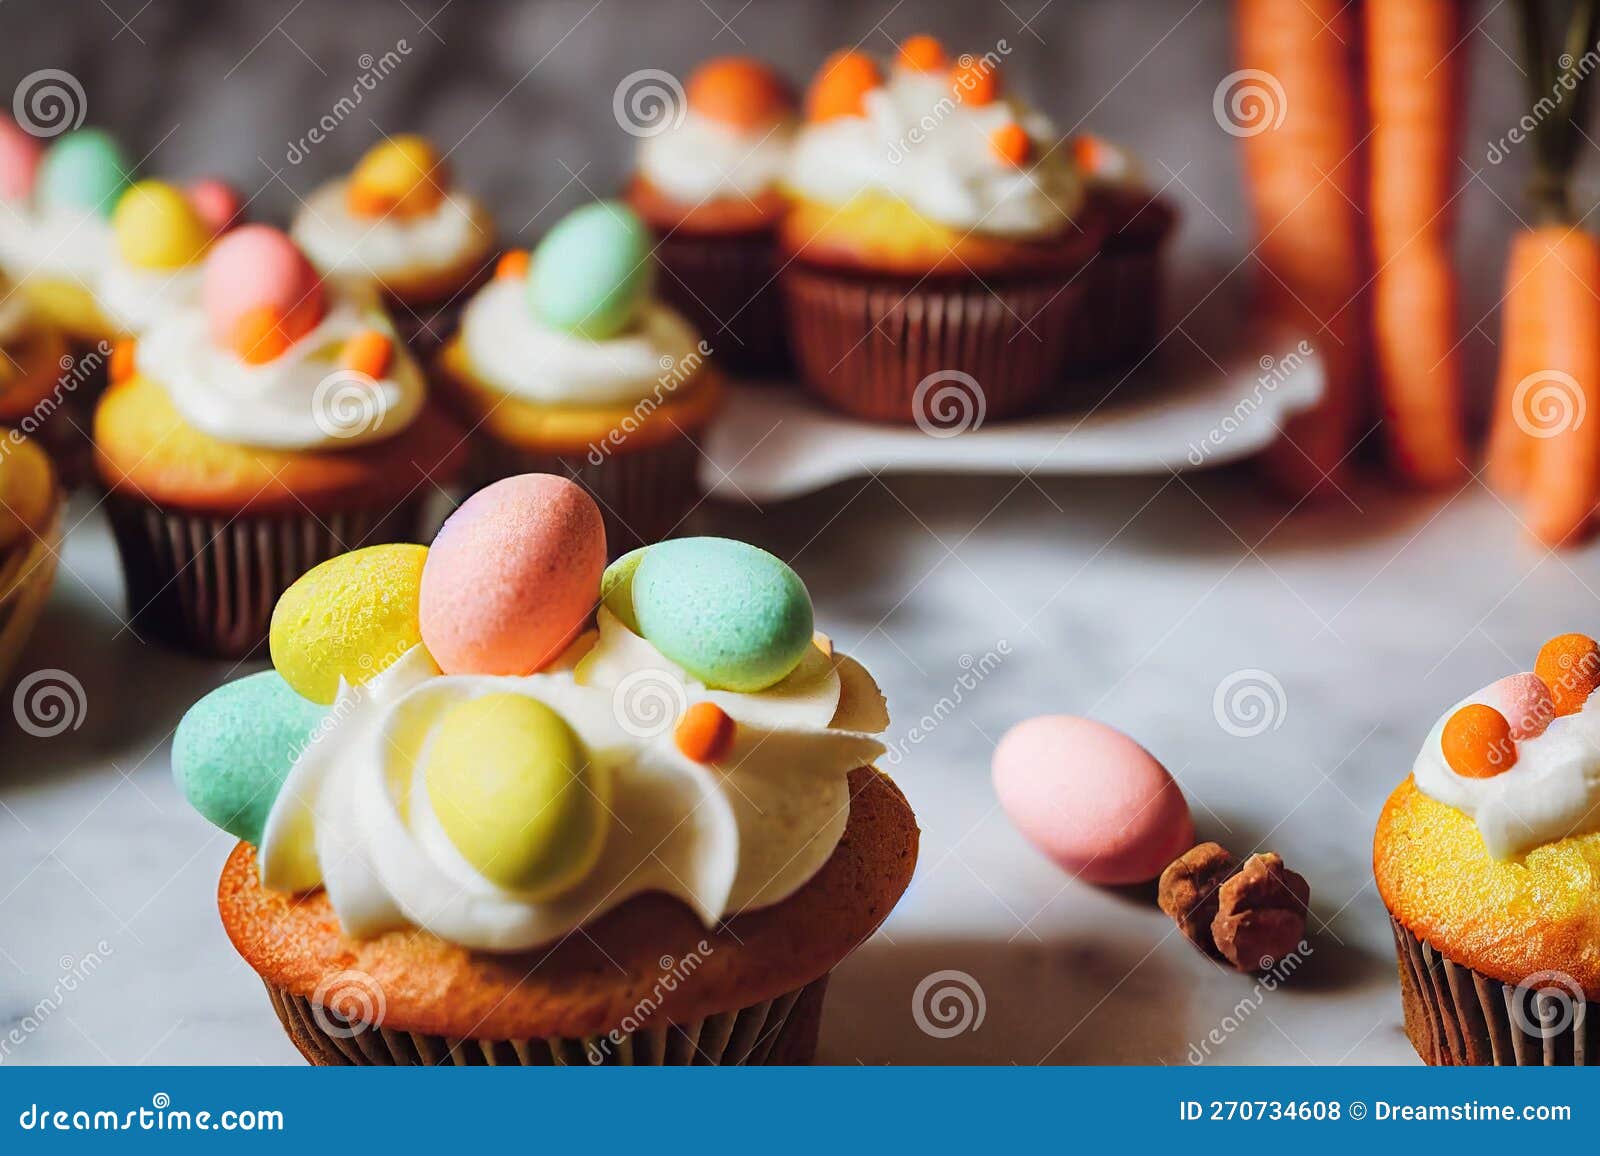 Cupcake Muffins with Cream and Decoration Carrot Cake on Table